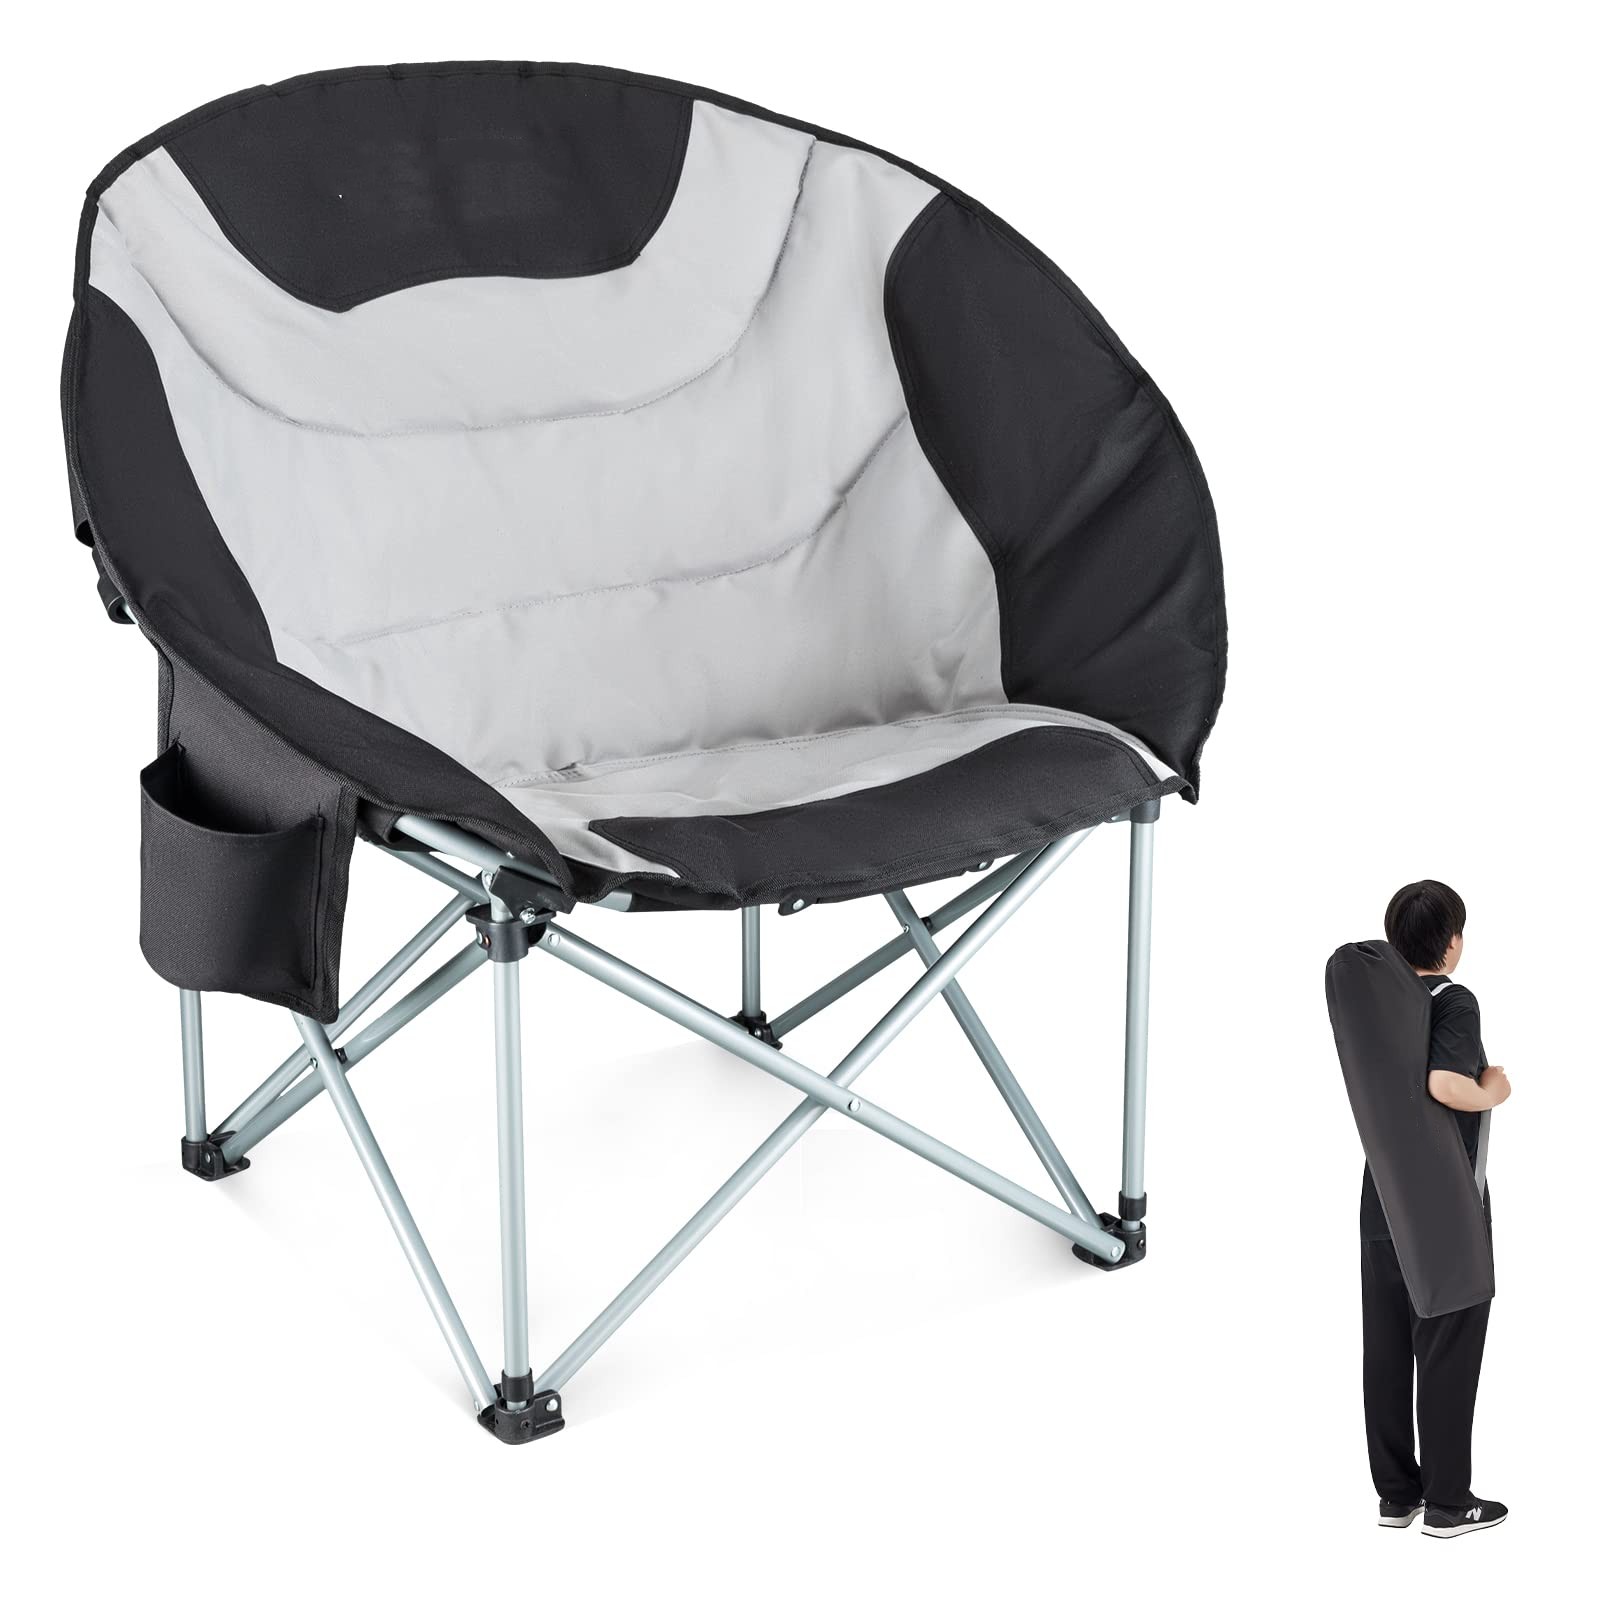 Oversized Thicken Camping Beach Moon Chair